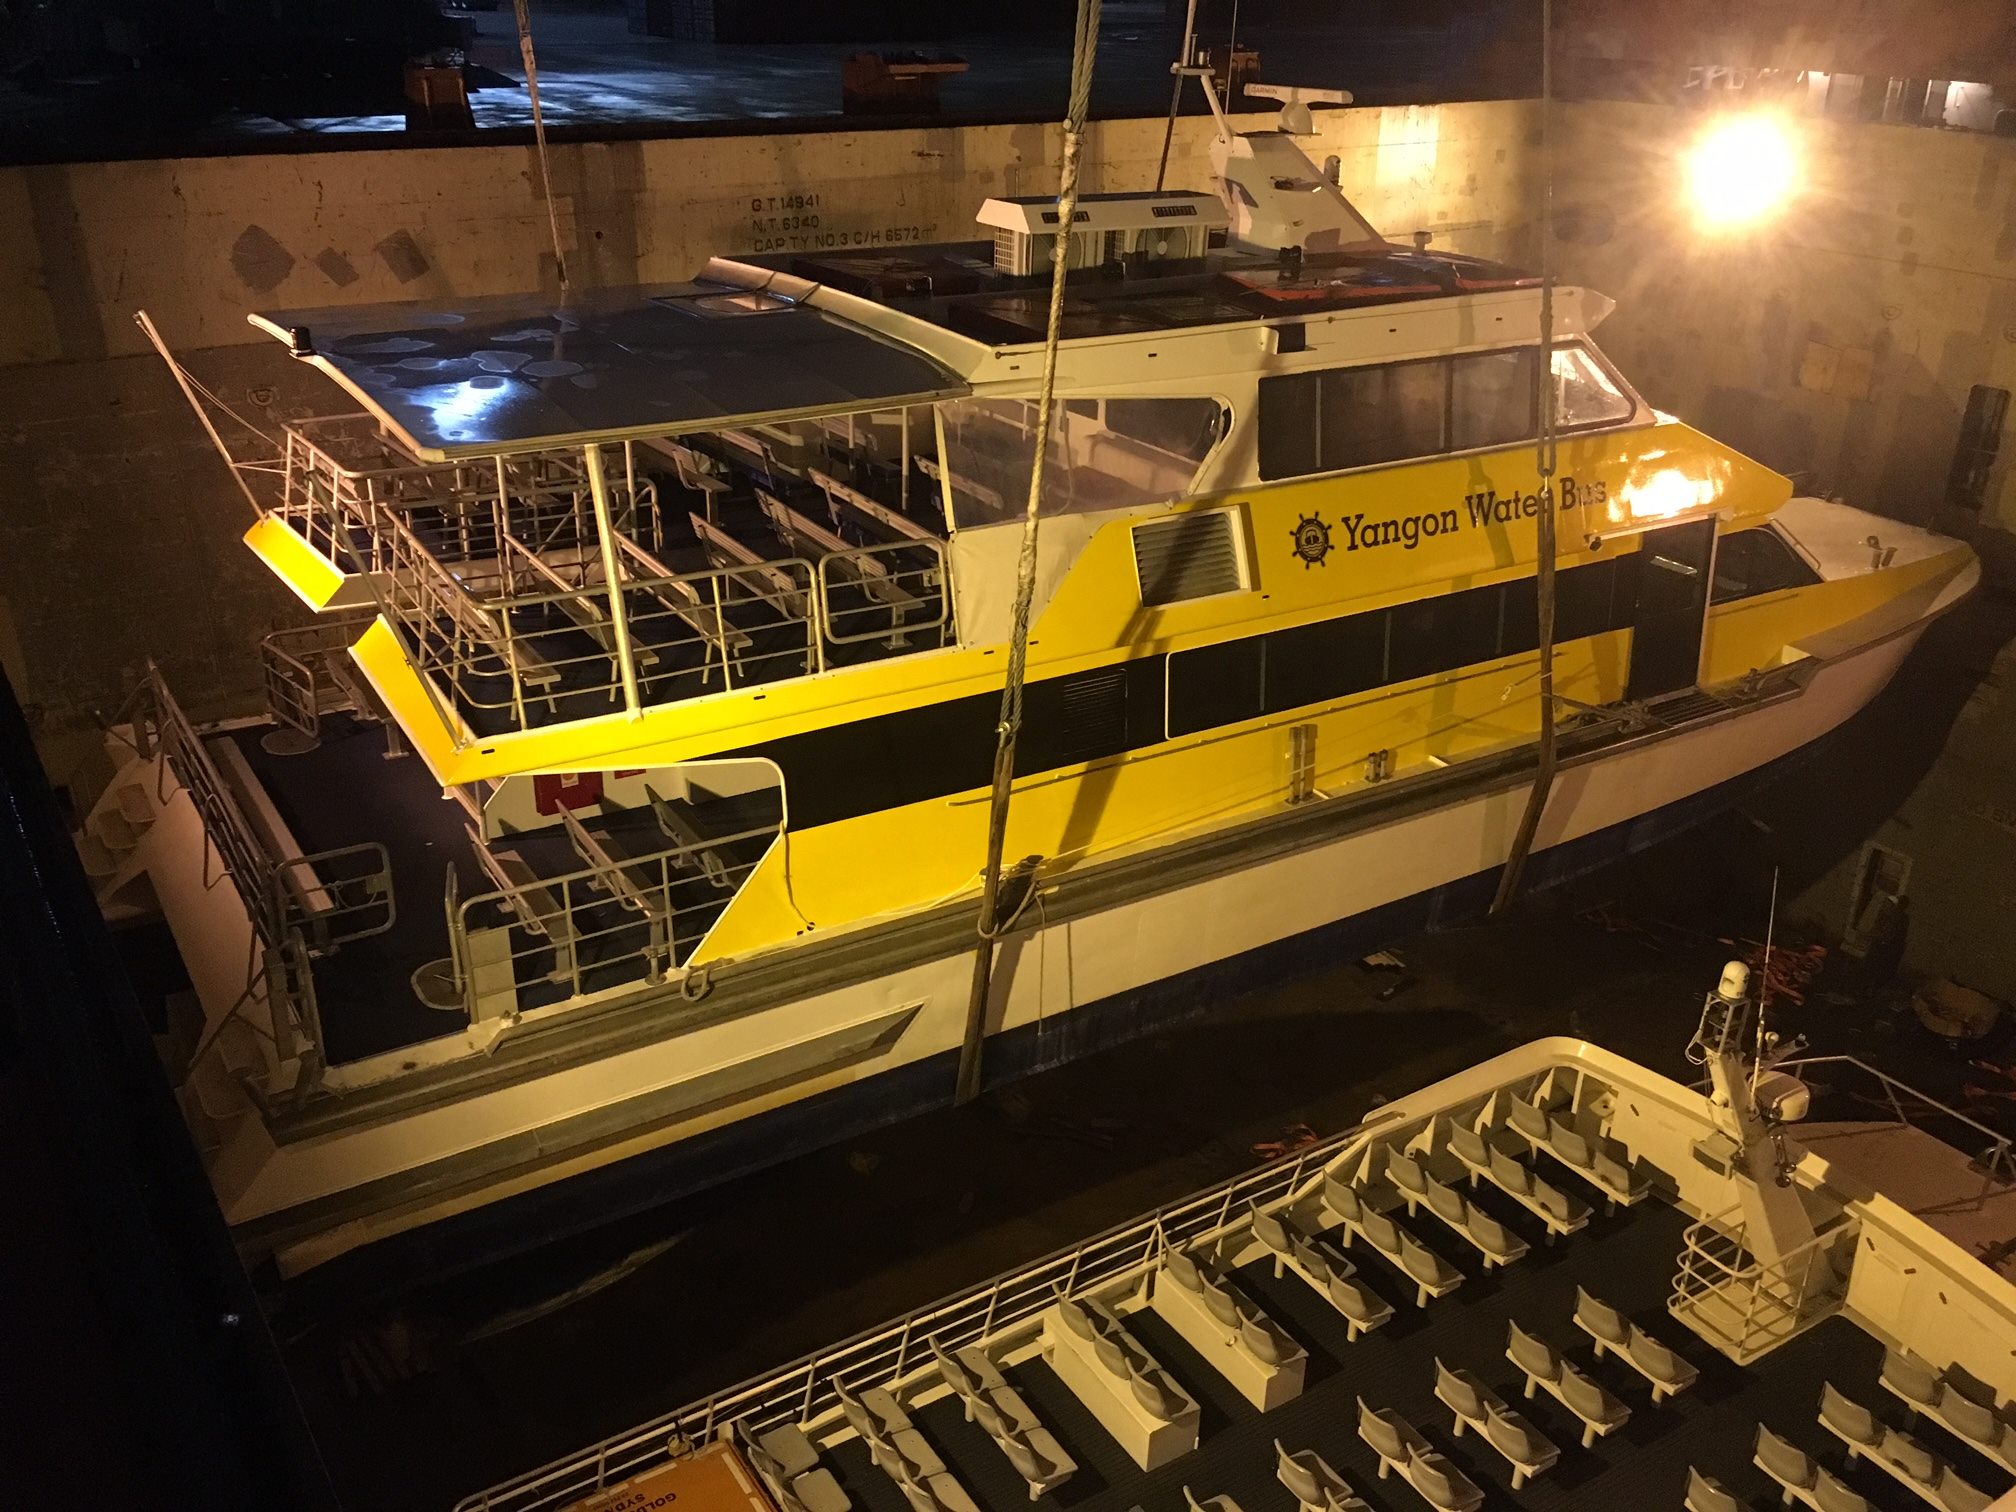 One of the Yangon Water Bus boats is unloaded in Yangon. Photo: Facebook / Yangon Water Bus